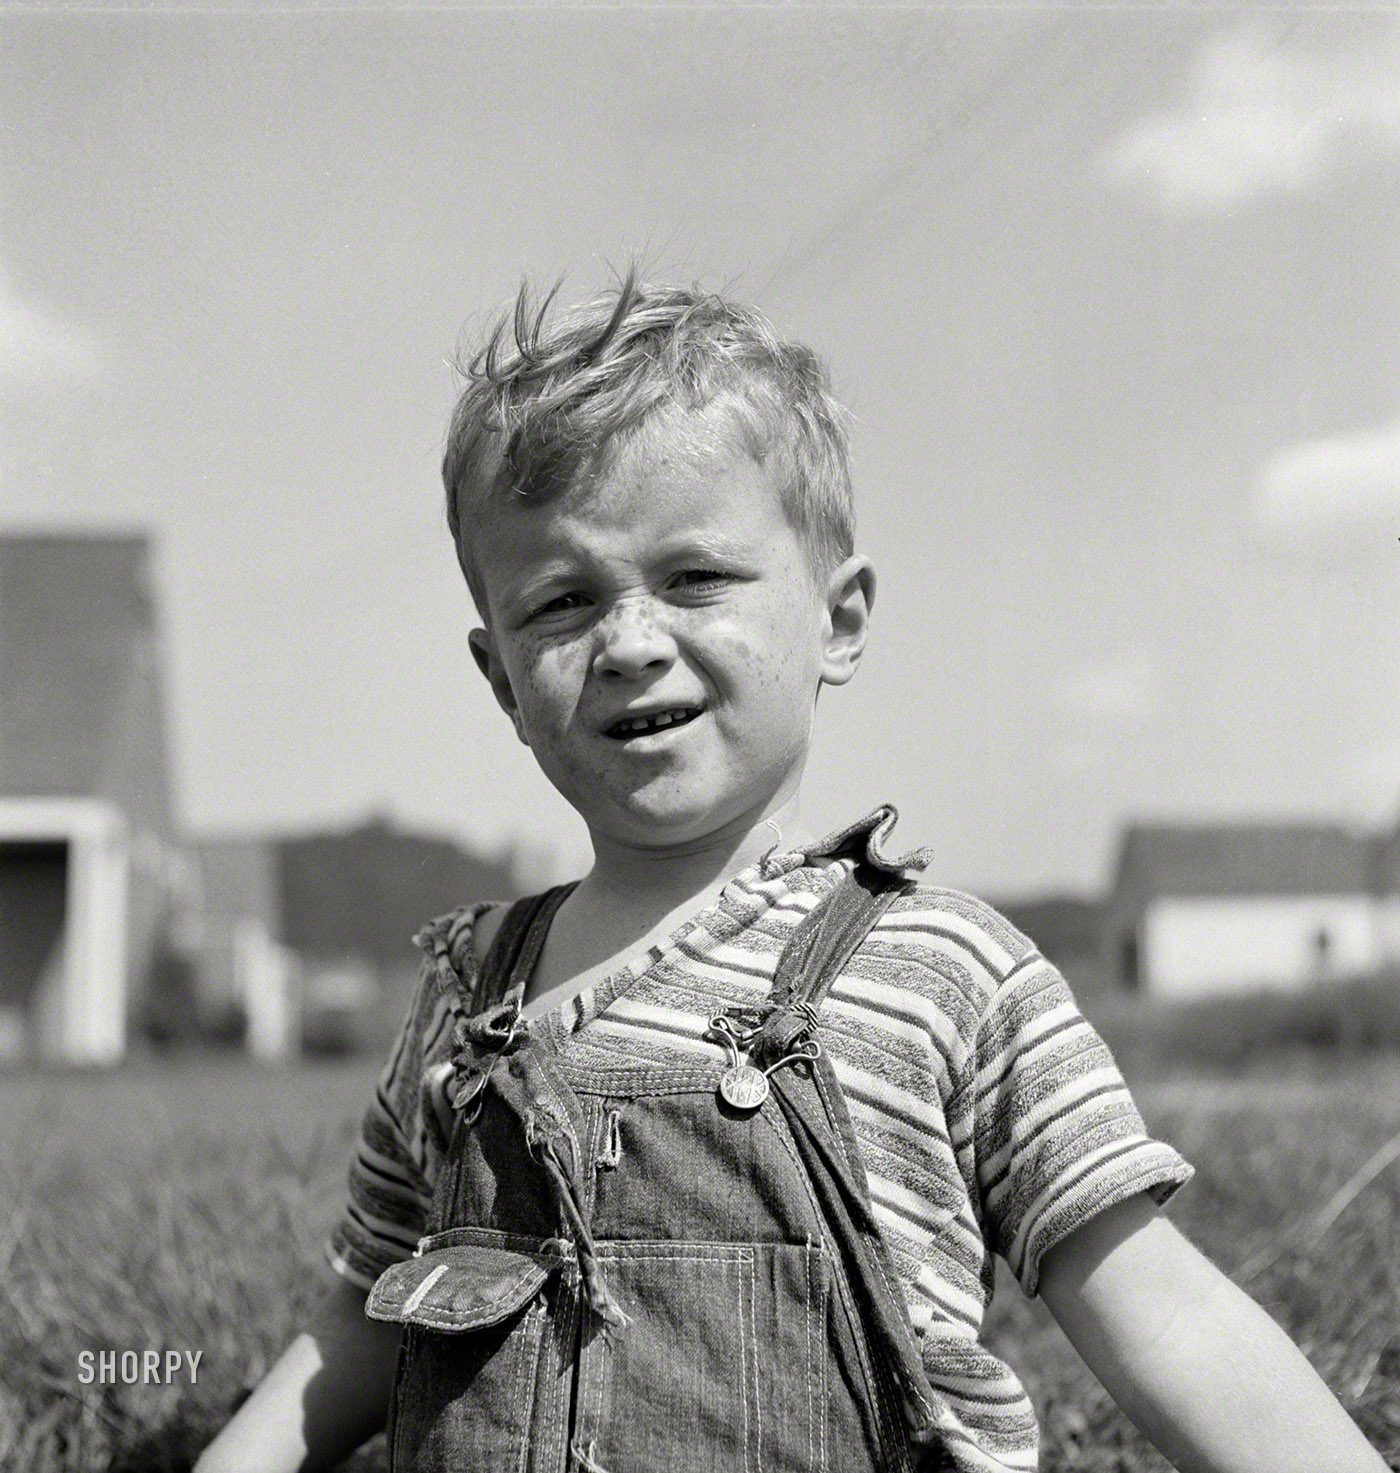 September 1939. "Son of Tygart Valley homesteader in Randolph County, West Virginia." Medium format negative by Marion Post Wolcott. View full size.